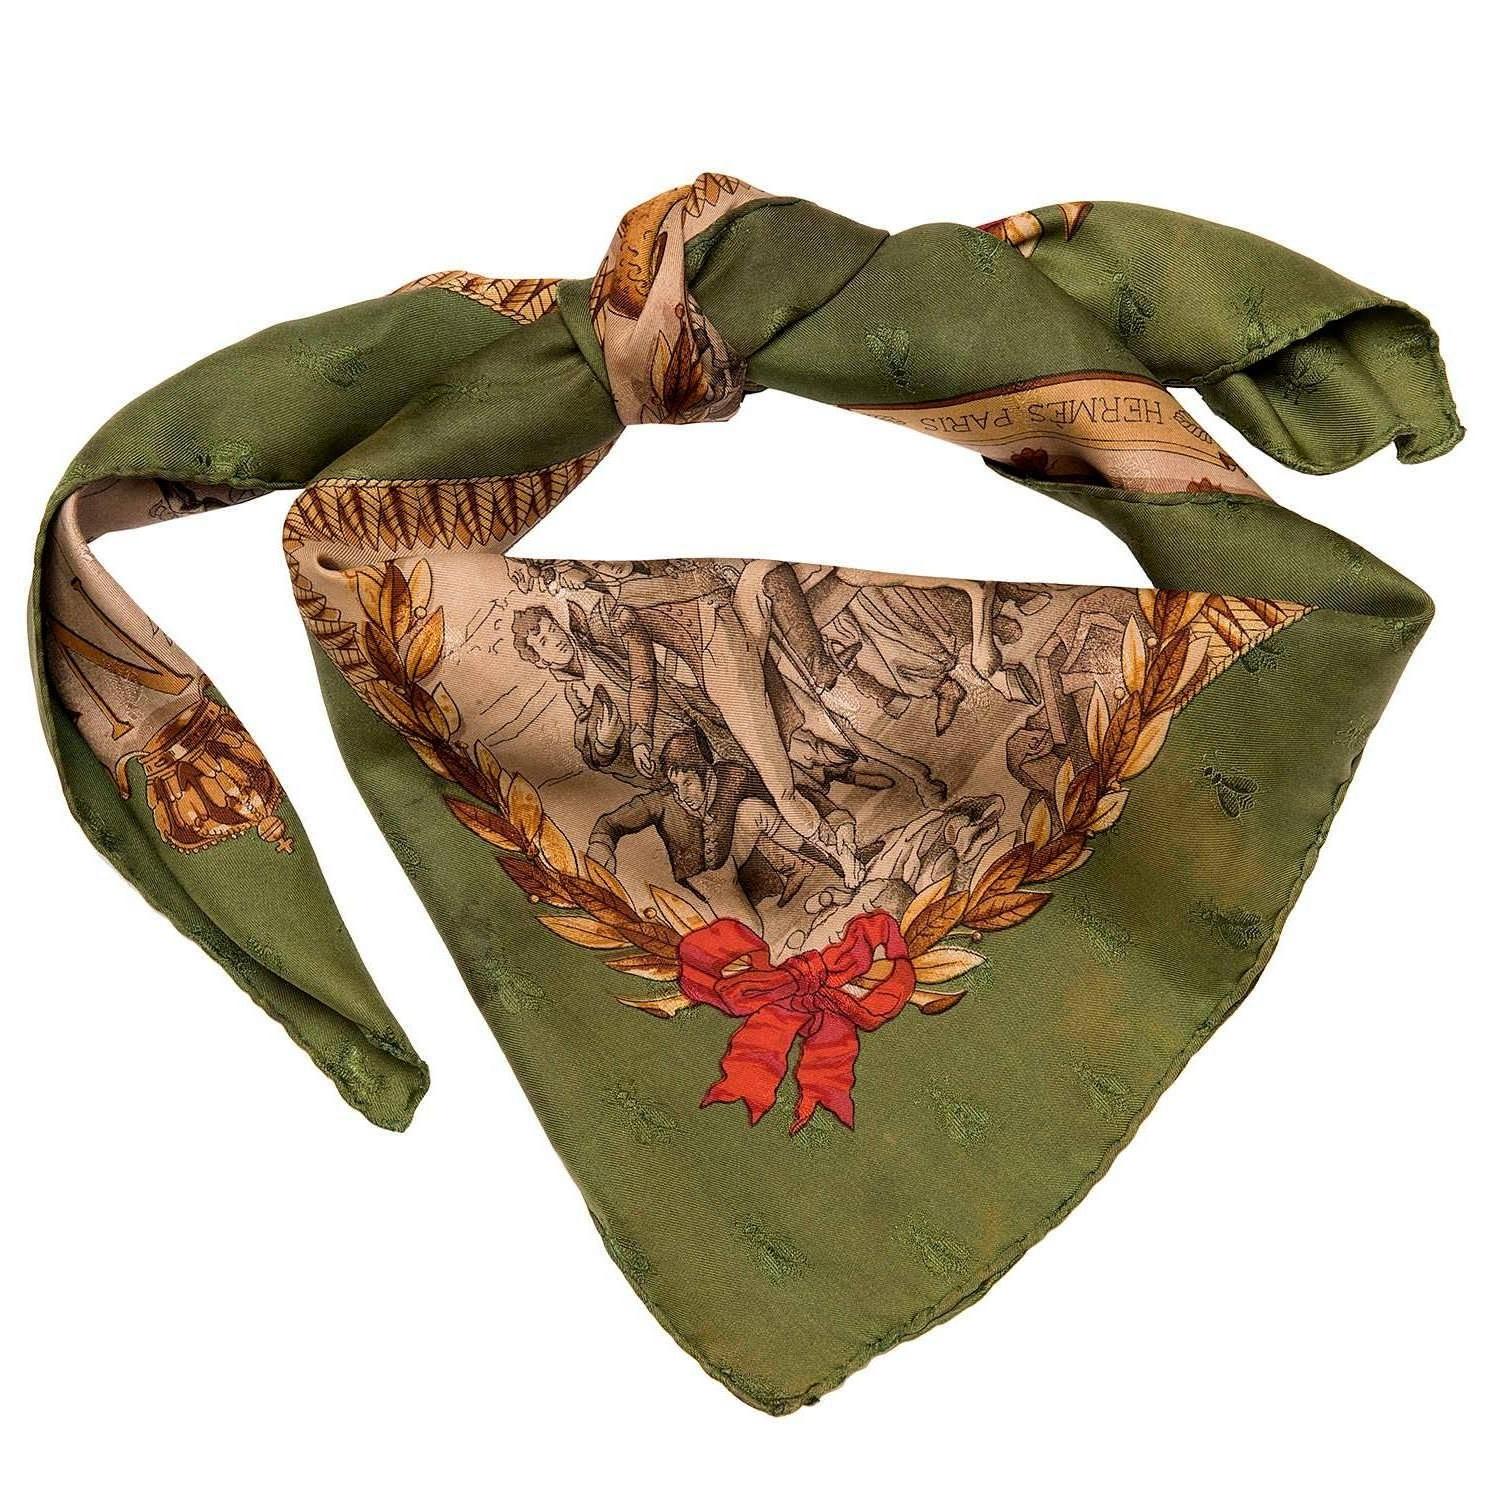 A Very Rare Hermes Silk Damask Scarf 'Napoleon' by Philippe Ledoux